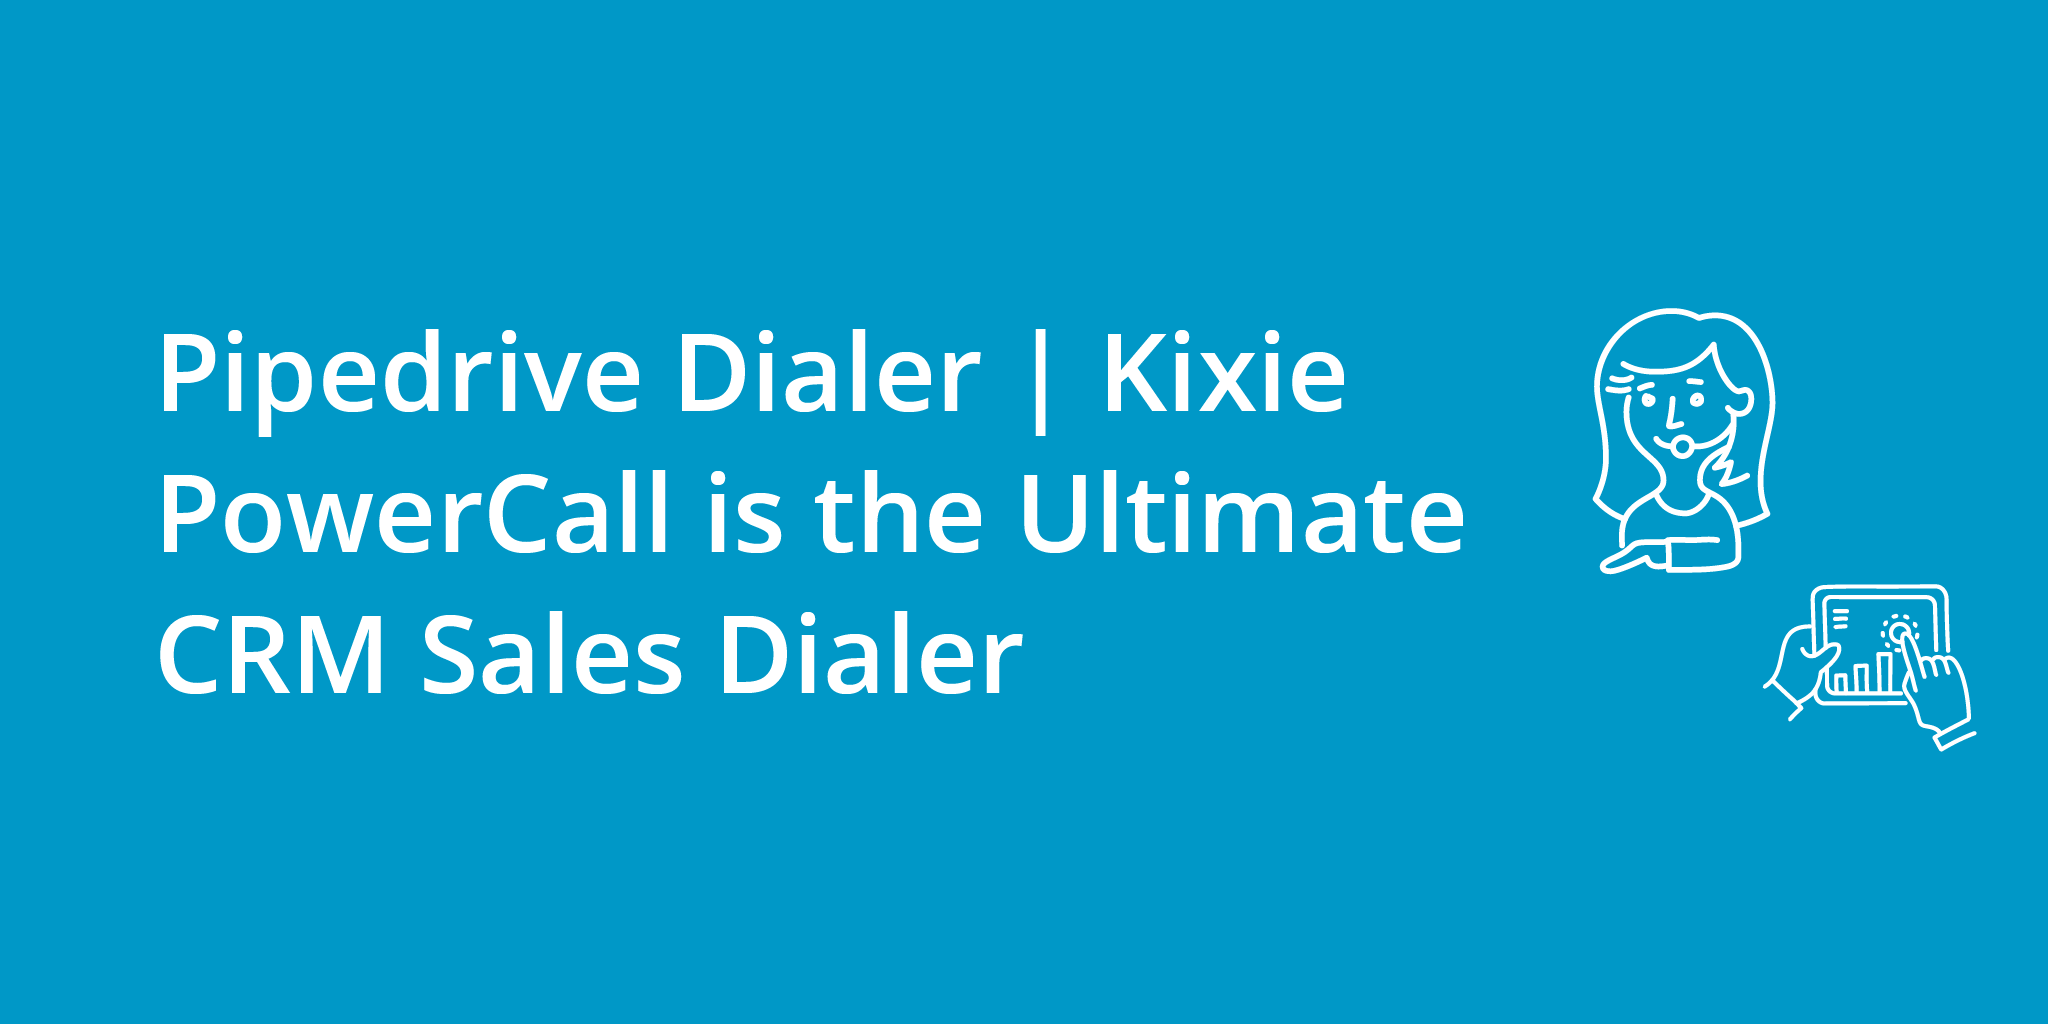 Pipedrive Dialer | Kixie Ultimate CRM Sales Dialer | Telephones for business